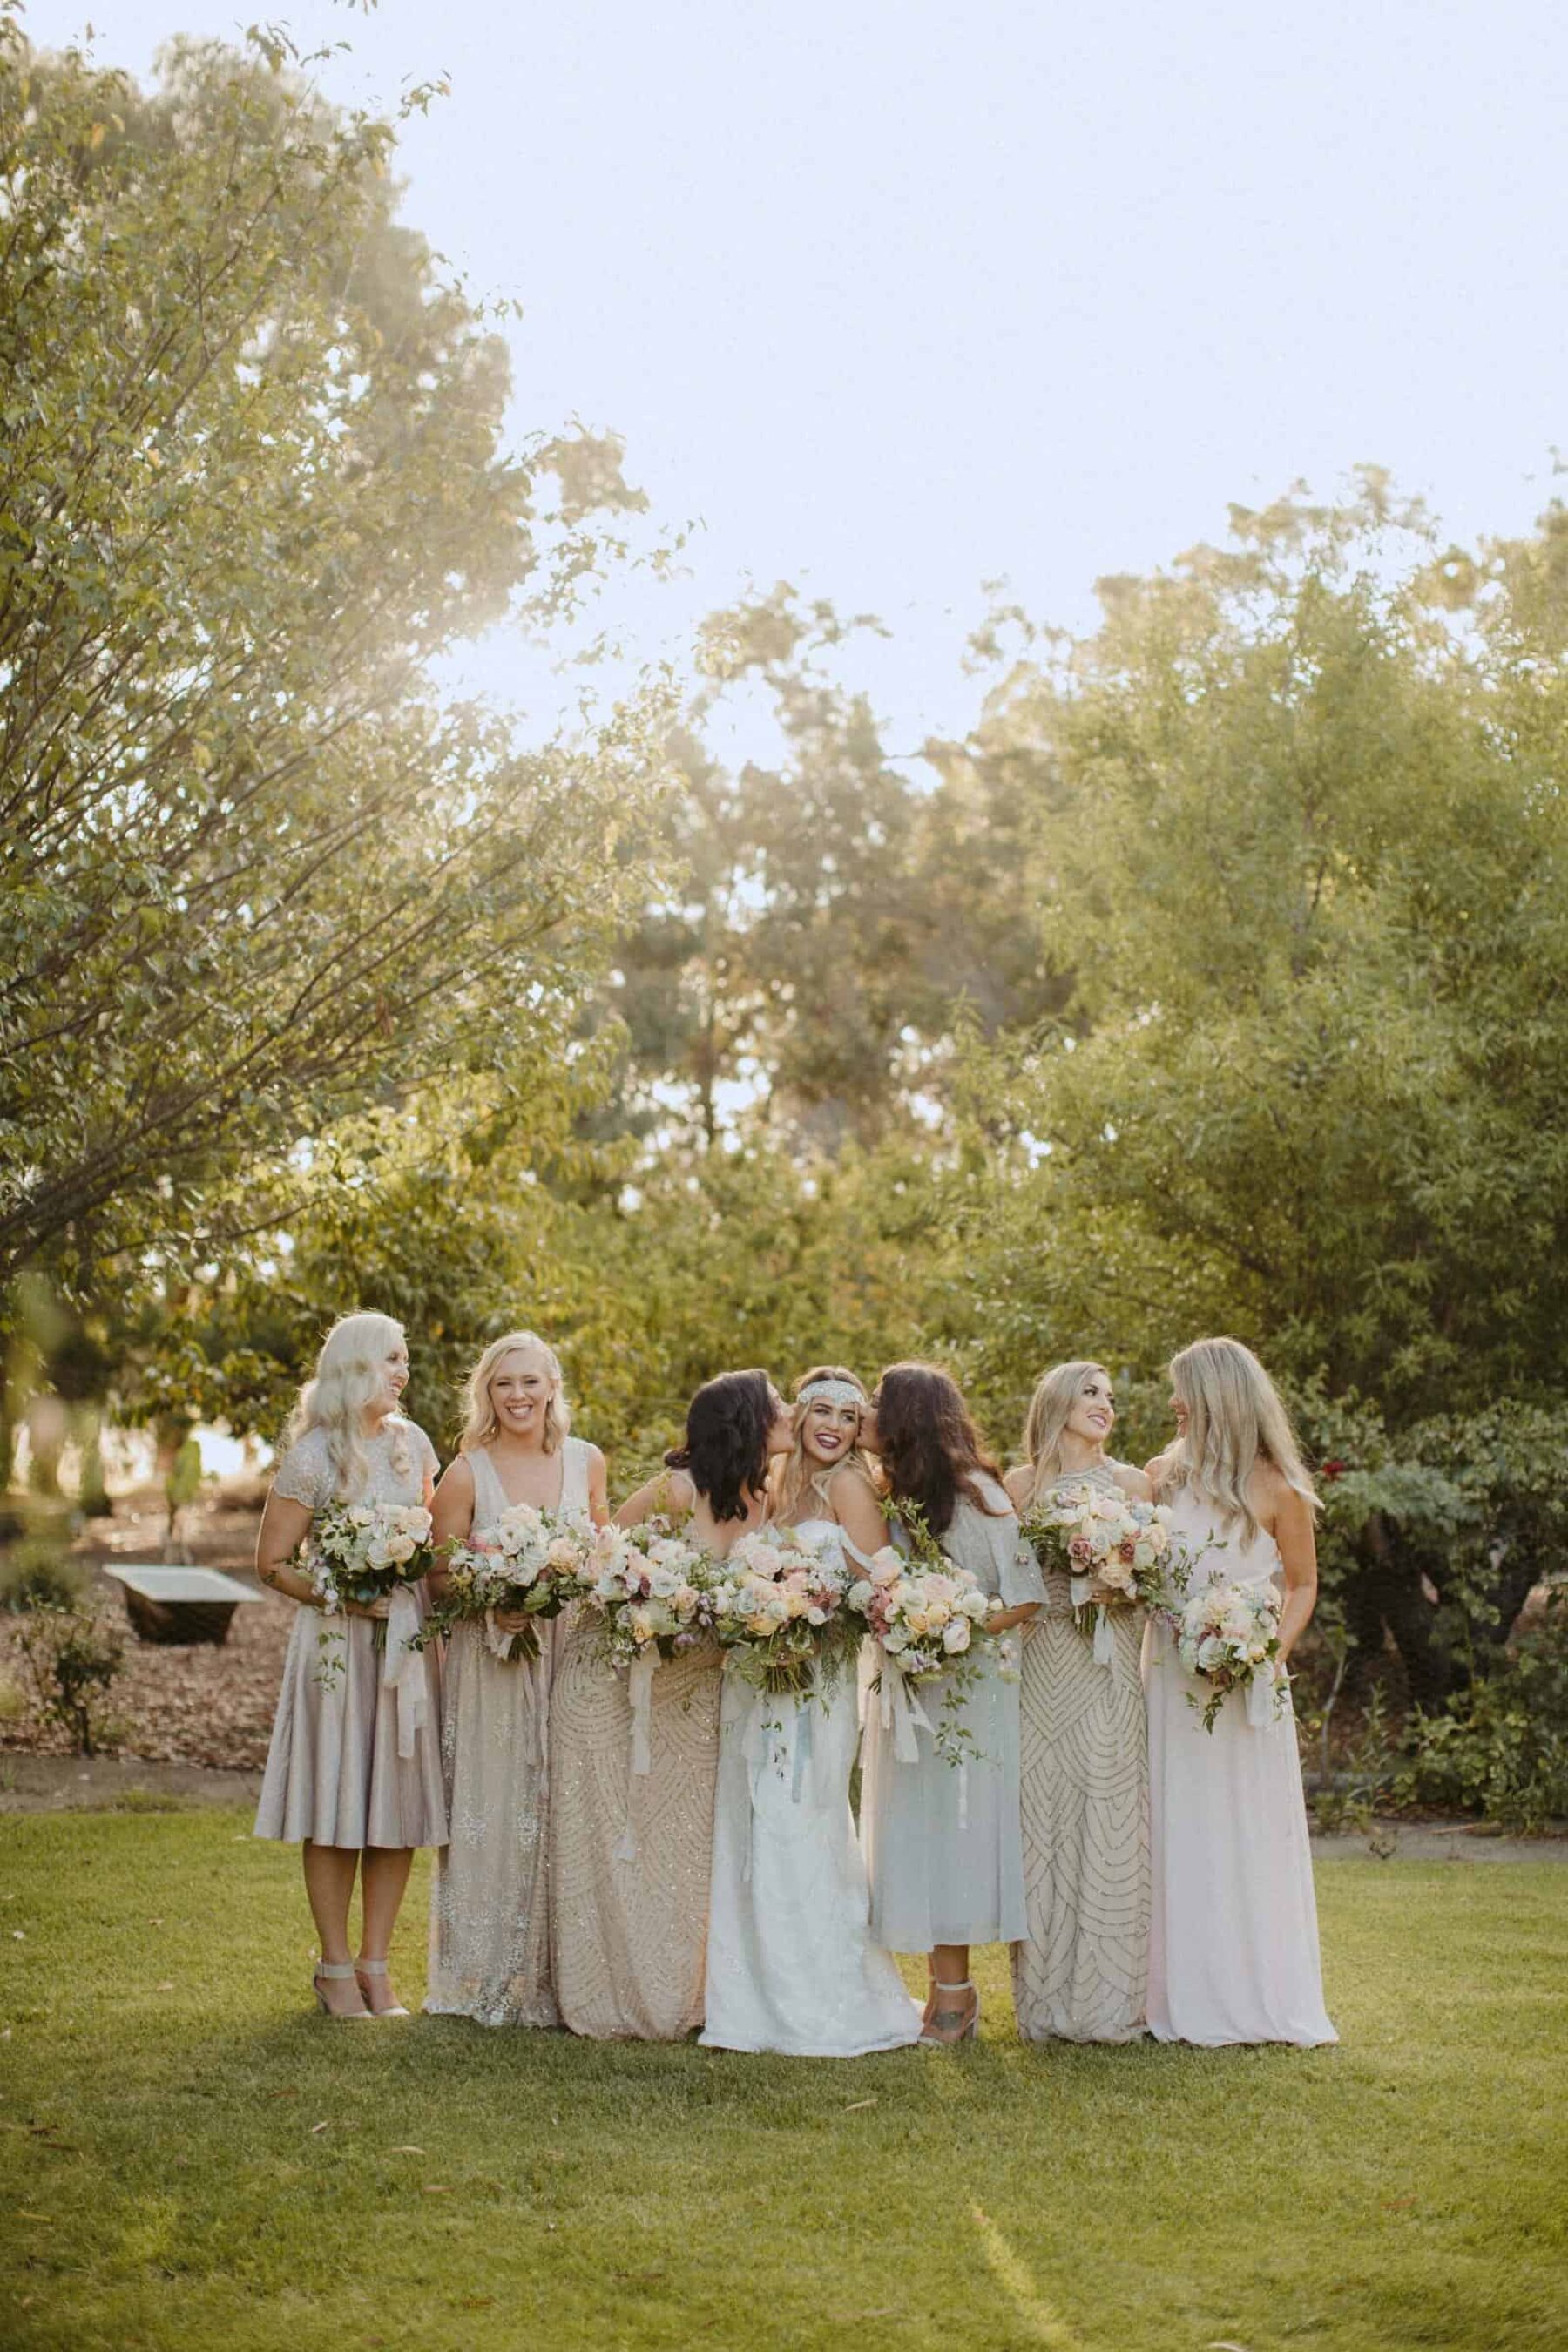 Gatsby inspired bridal party with mismatched neutral bridesmaid dresses